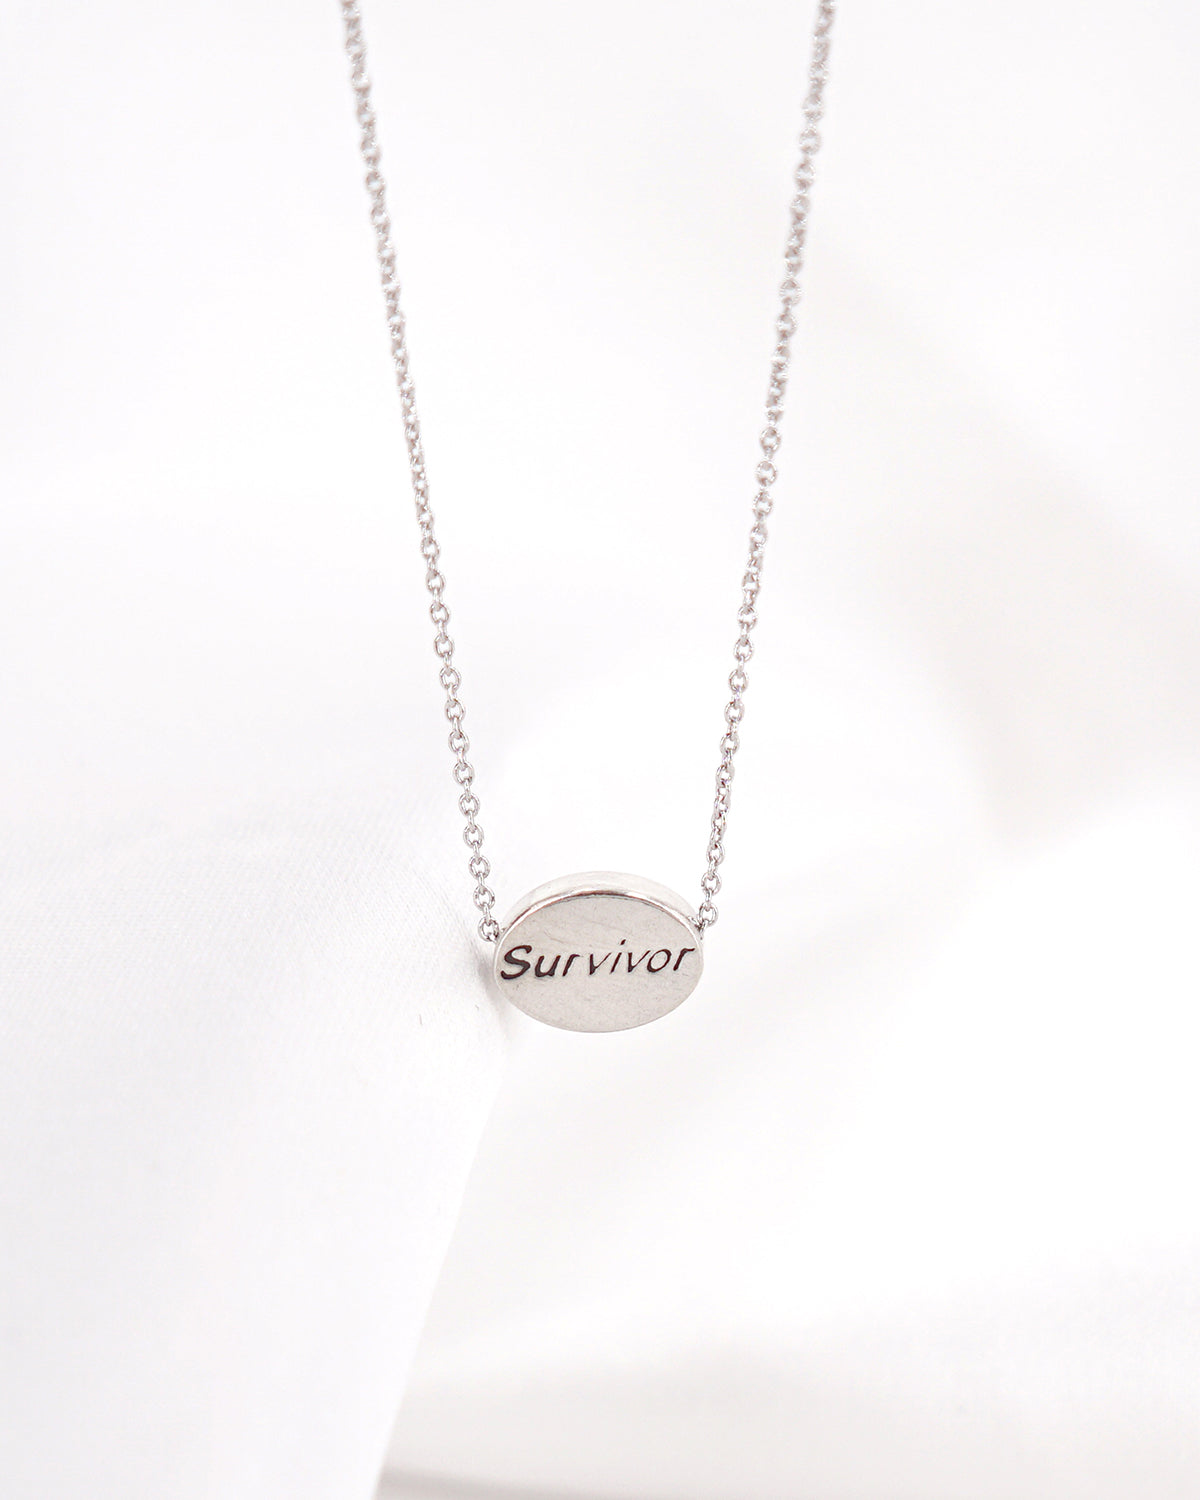 Cancer Survivor Necklace | Jewelry for a Cause | Proceeds to Charity ...